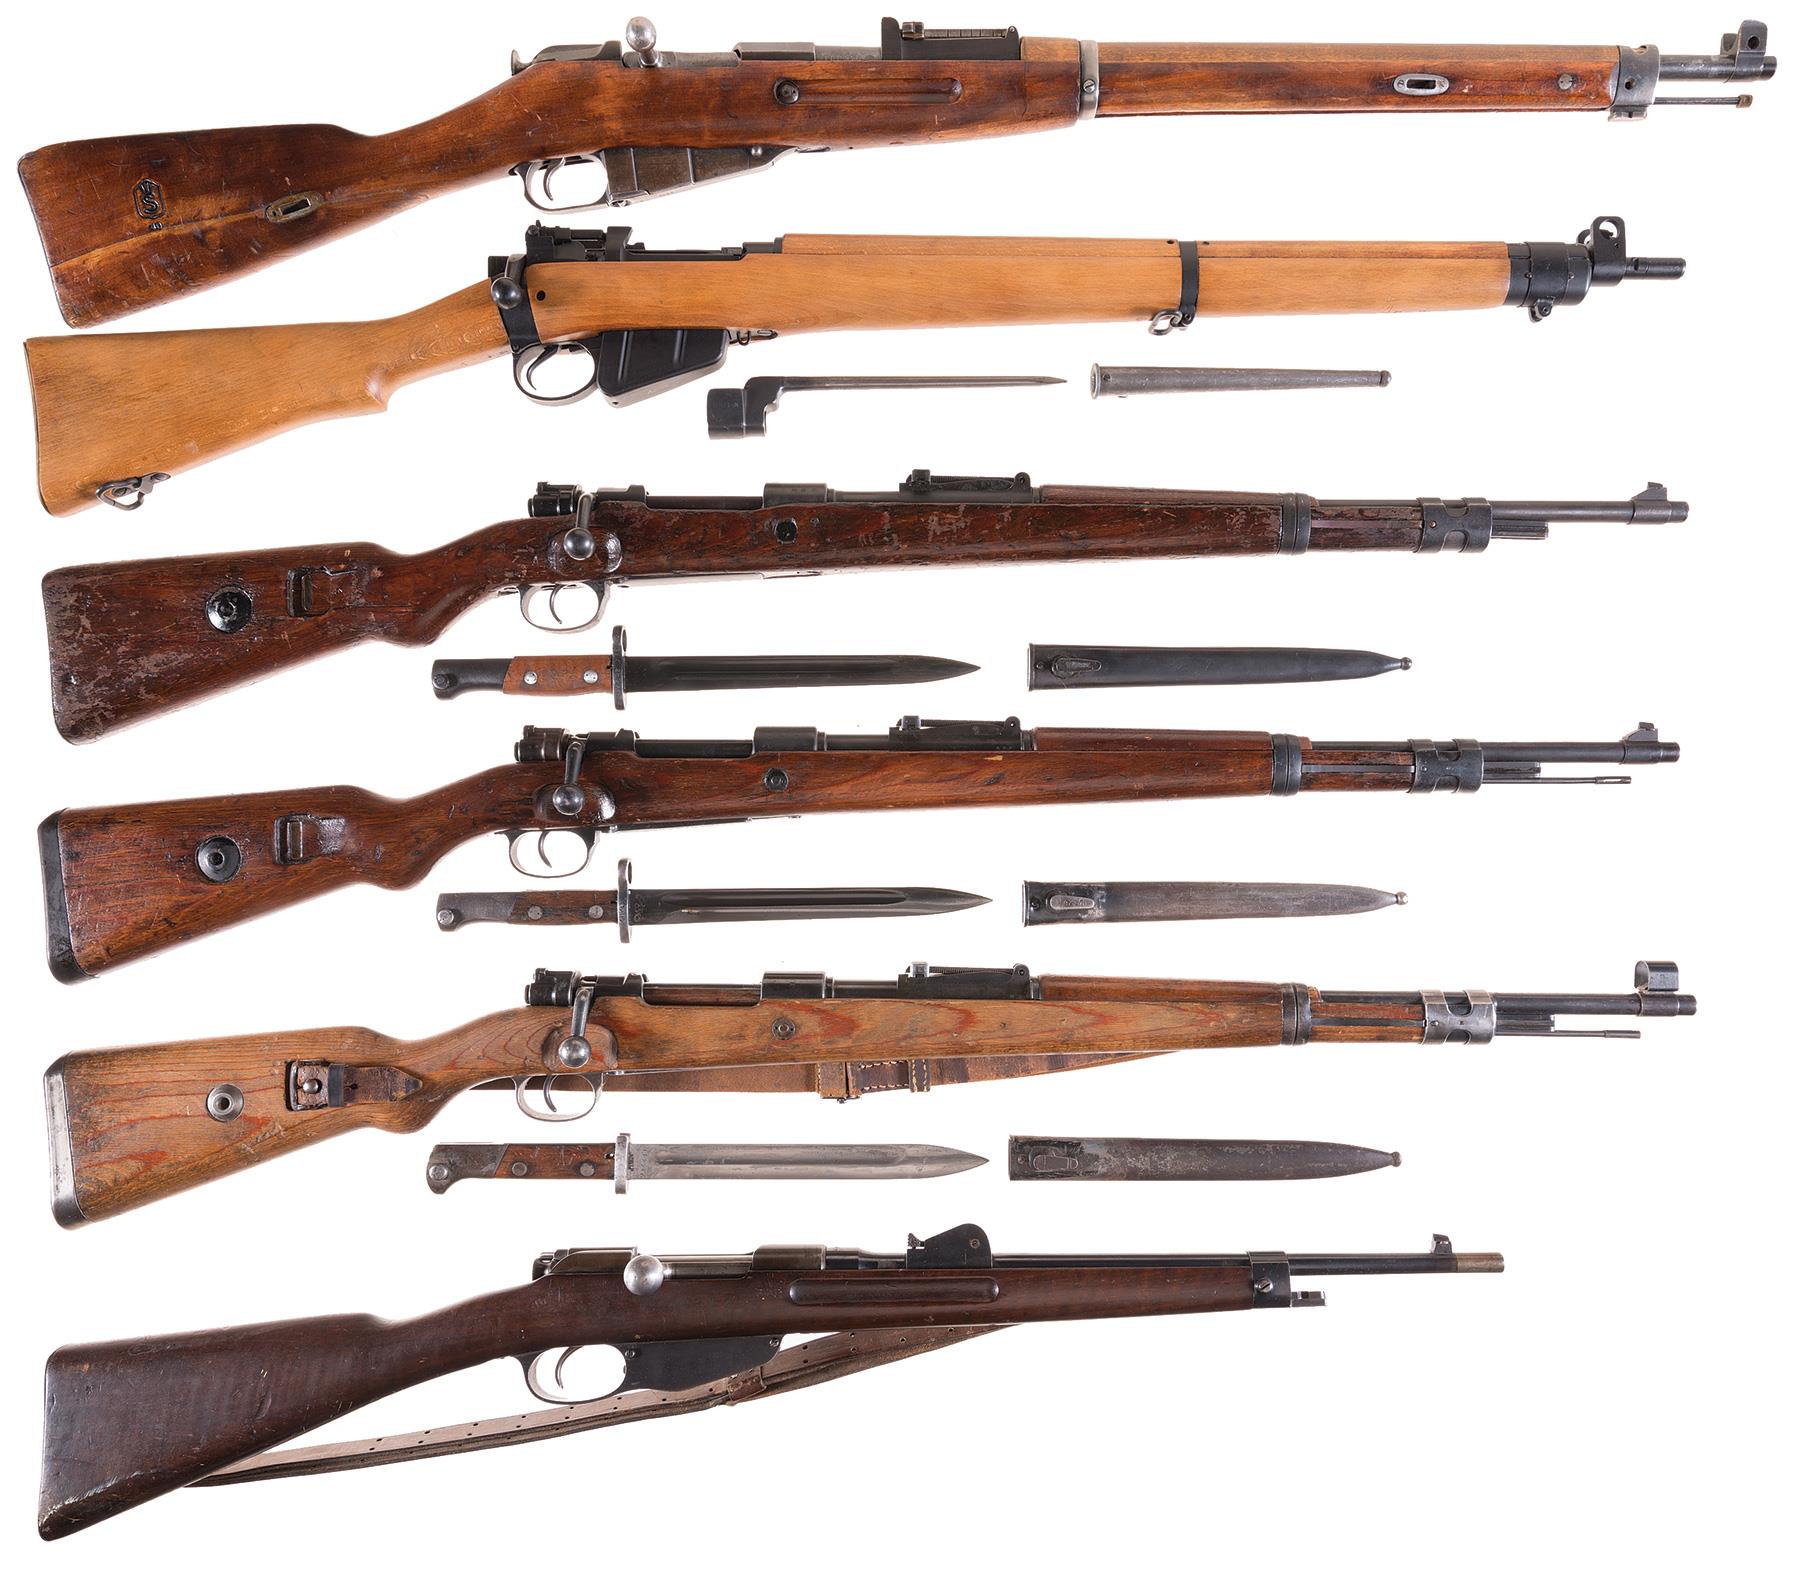 Hundreds of Military Rifles Up For Auction